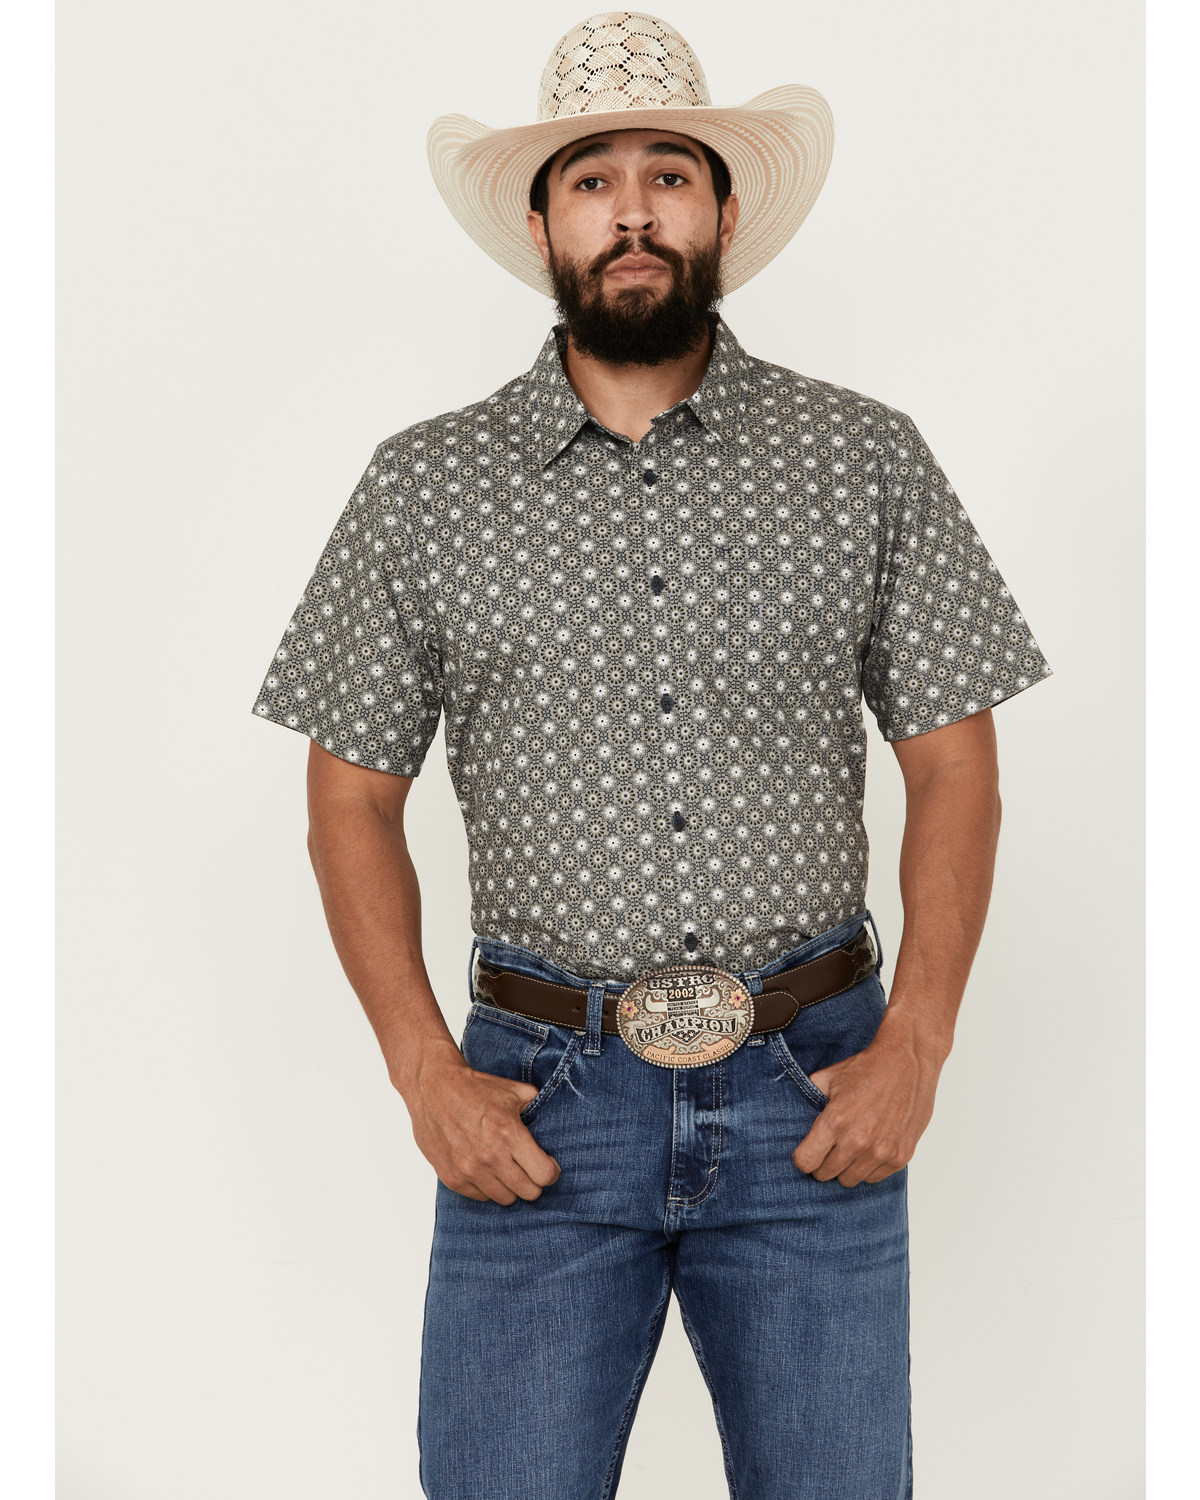 Gibson Trading Co Men's Good Time Geo Print Button-Down Short Sleeve Western Shirt